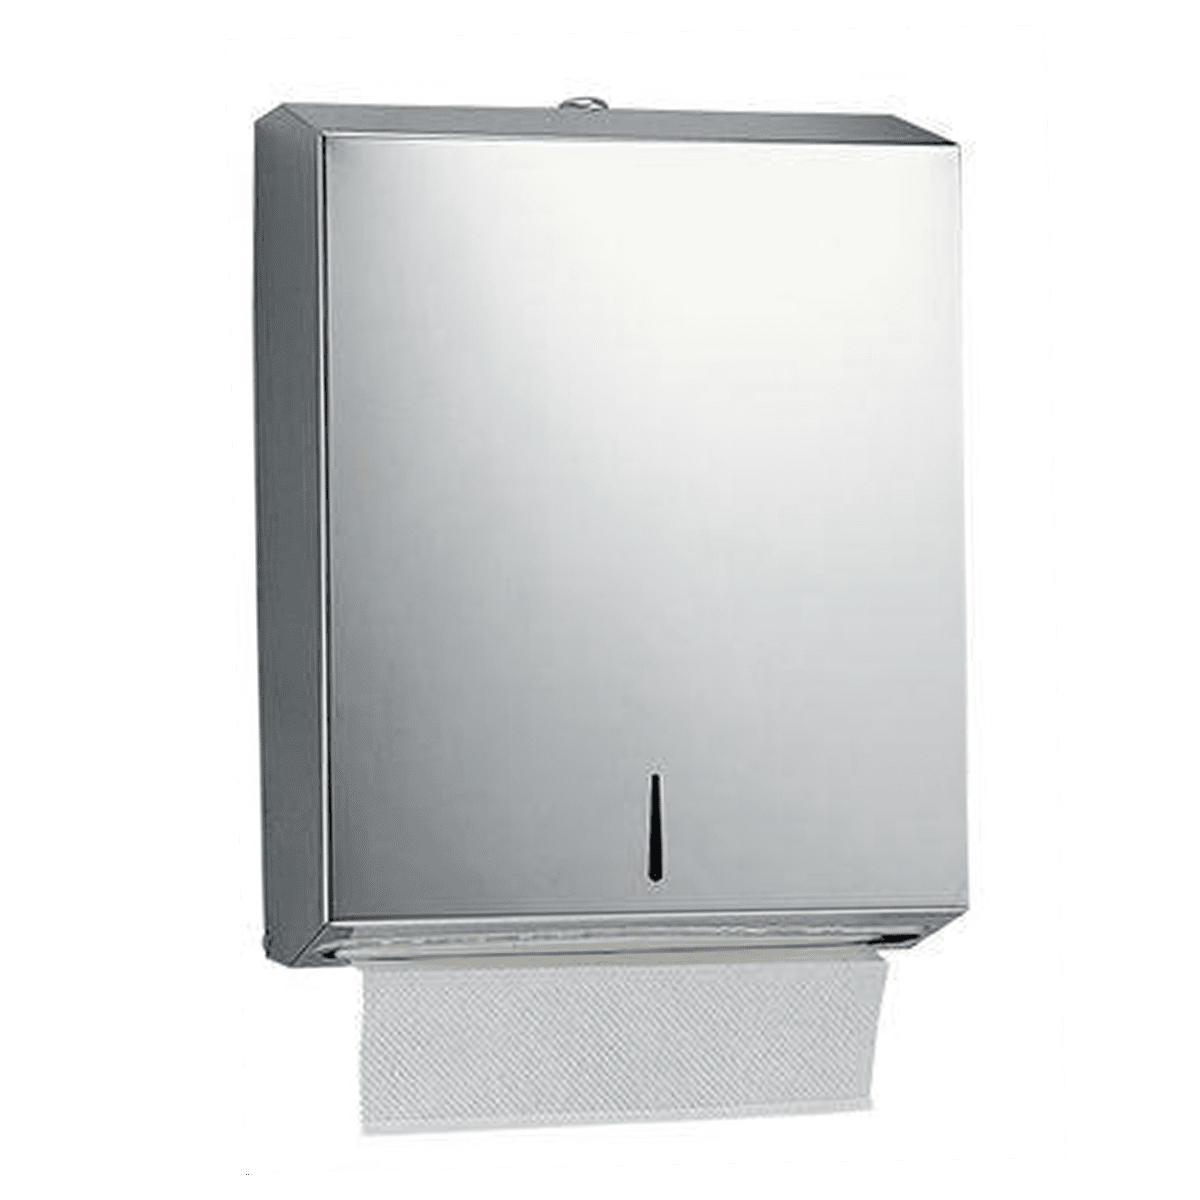 Olmecs Wall Mounted Stainless Steel Tissue Dispenser